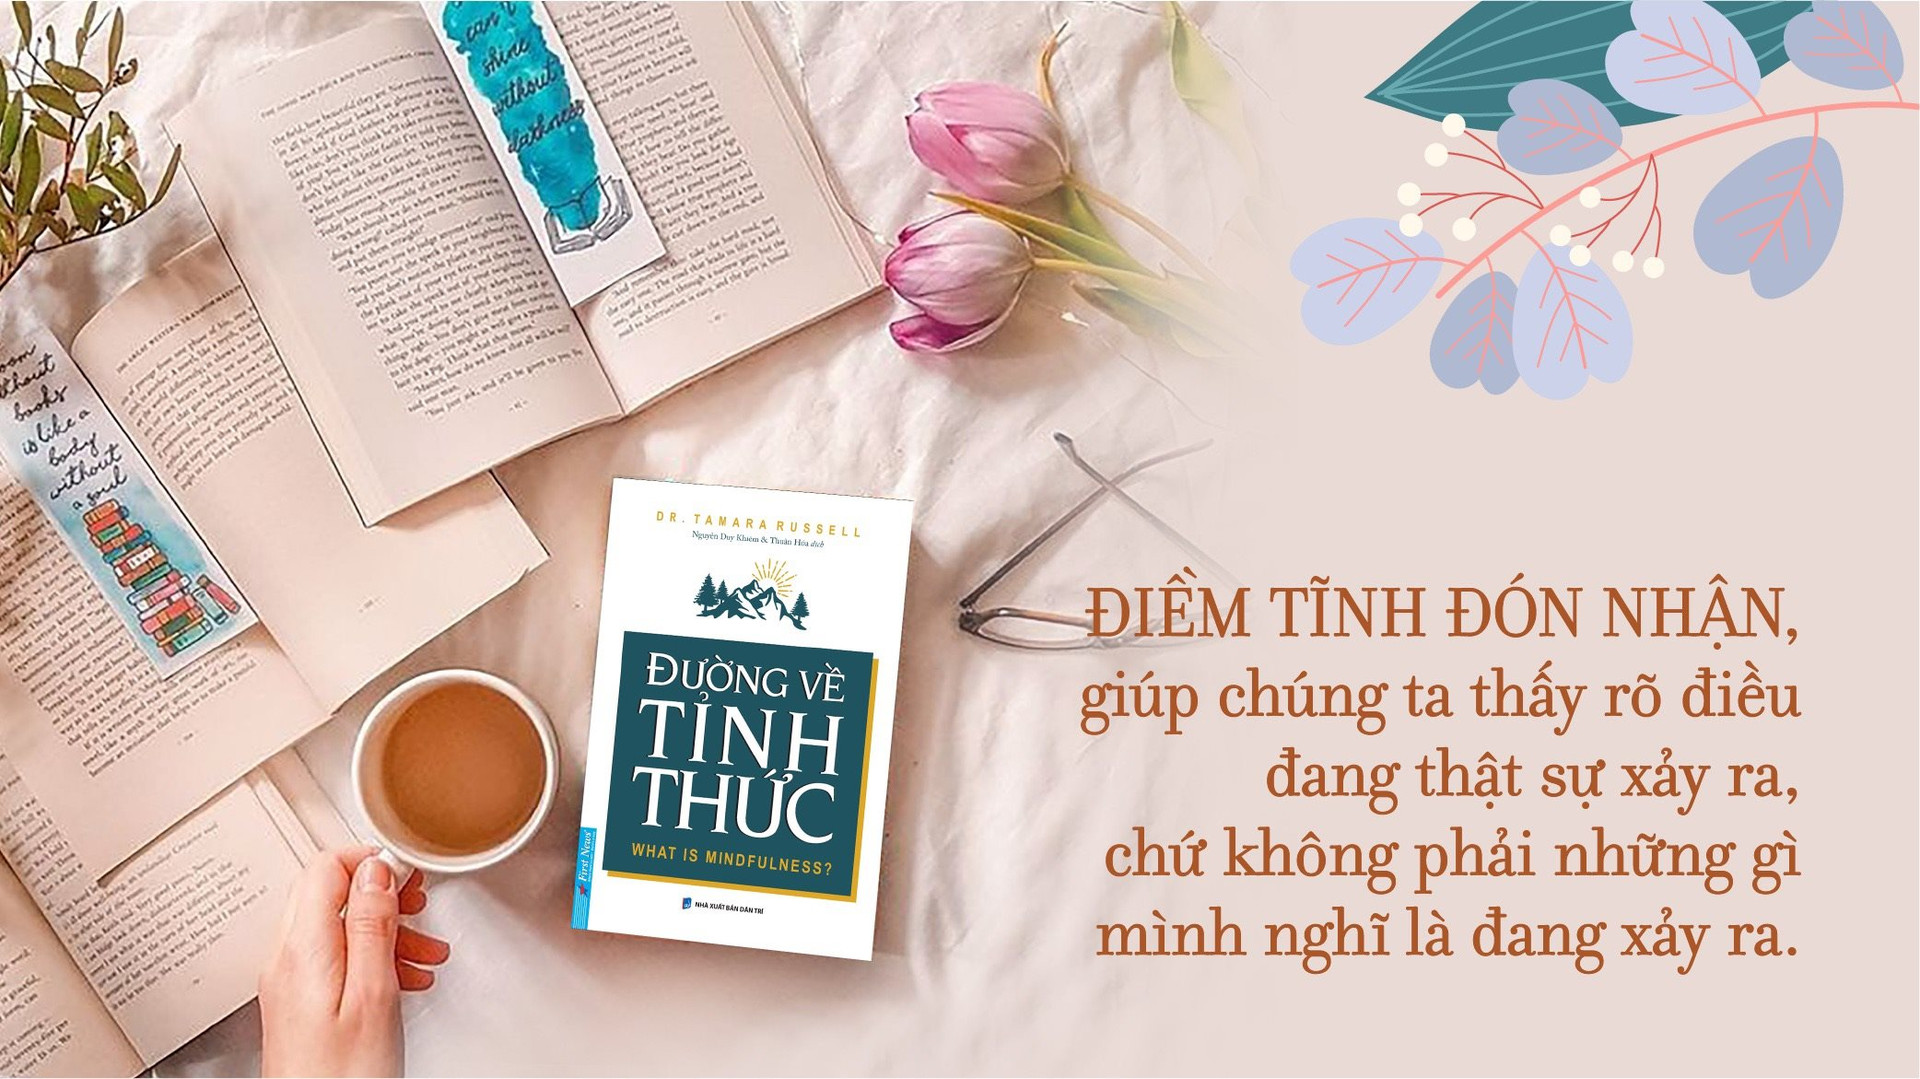 quote-duong-ve-tinh-thuc-3.jpg